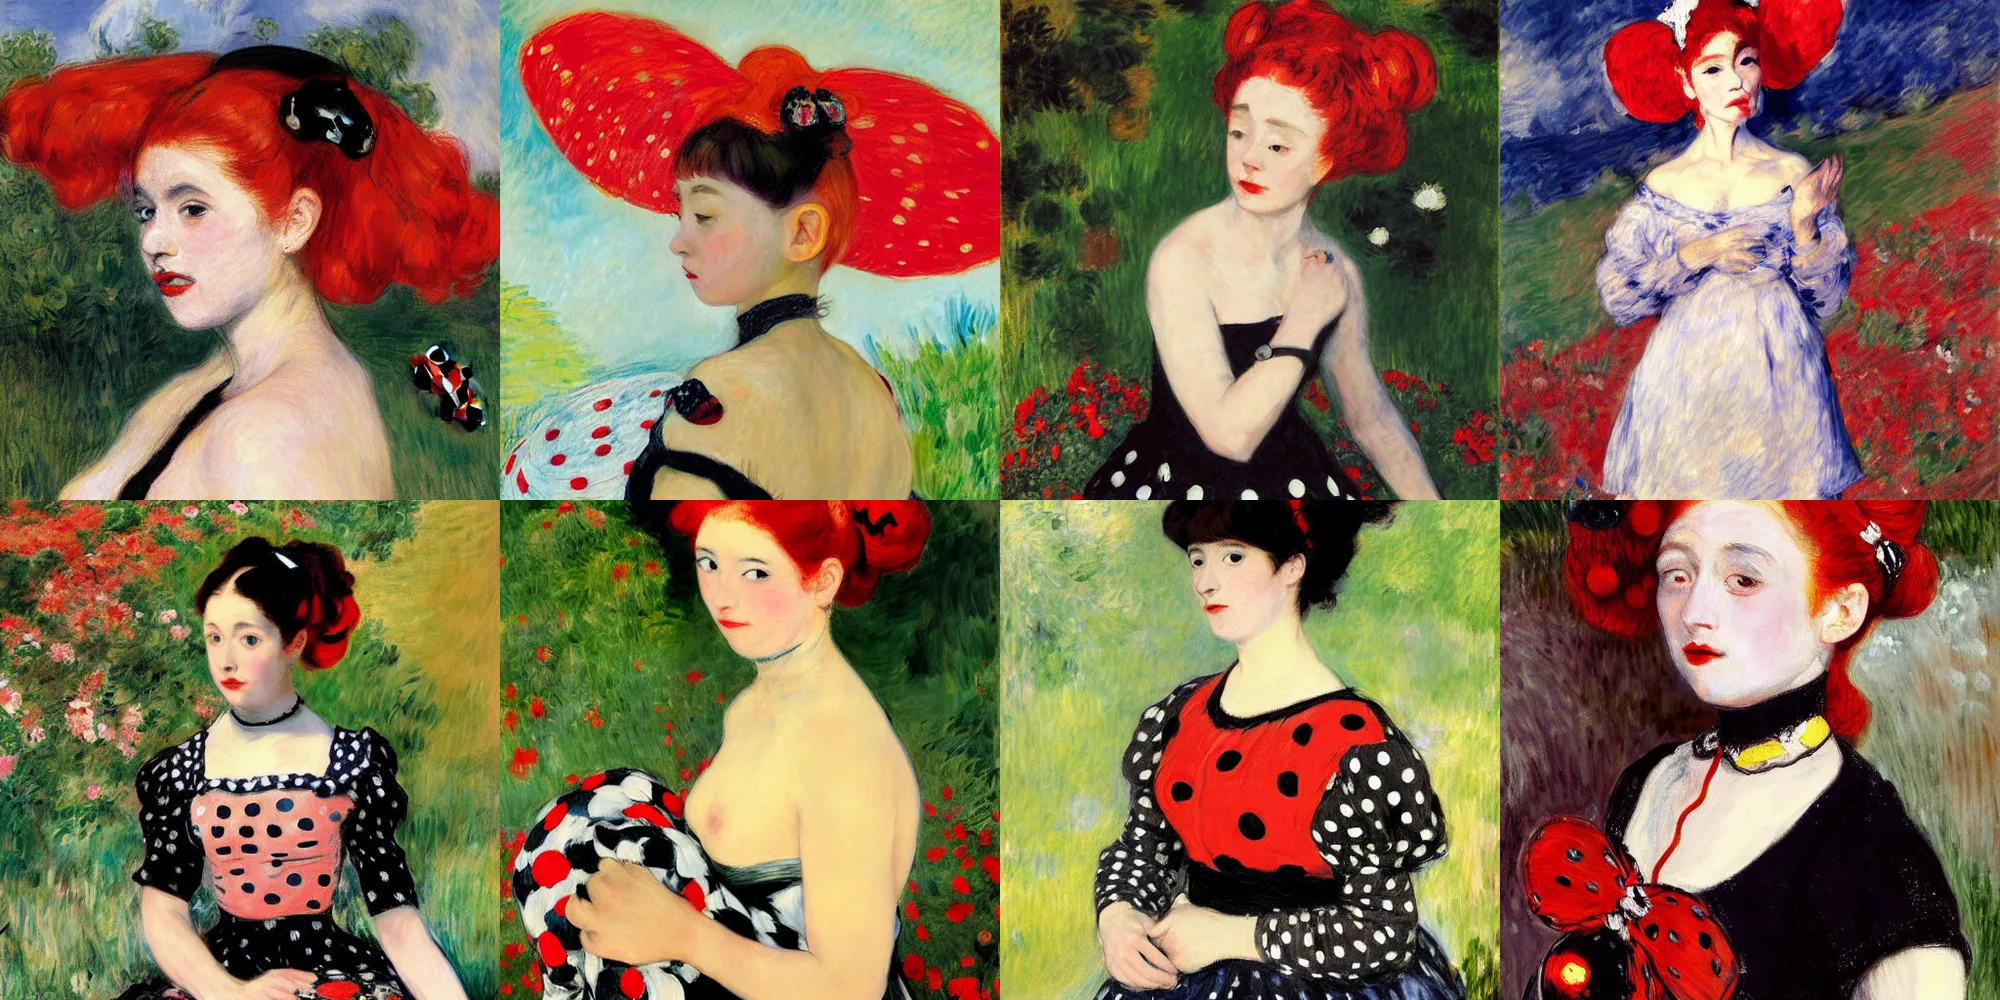 Prompt: an impressionistic portrait of a ladybug gijinka with red hair and space buns wearing a polka dot top and black skirt in the style of monet and manet, digital art